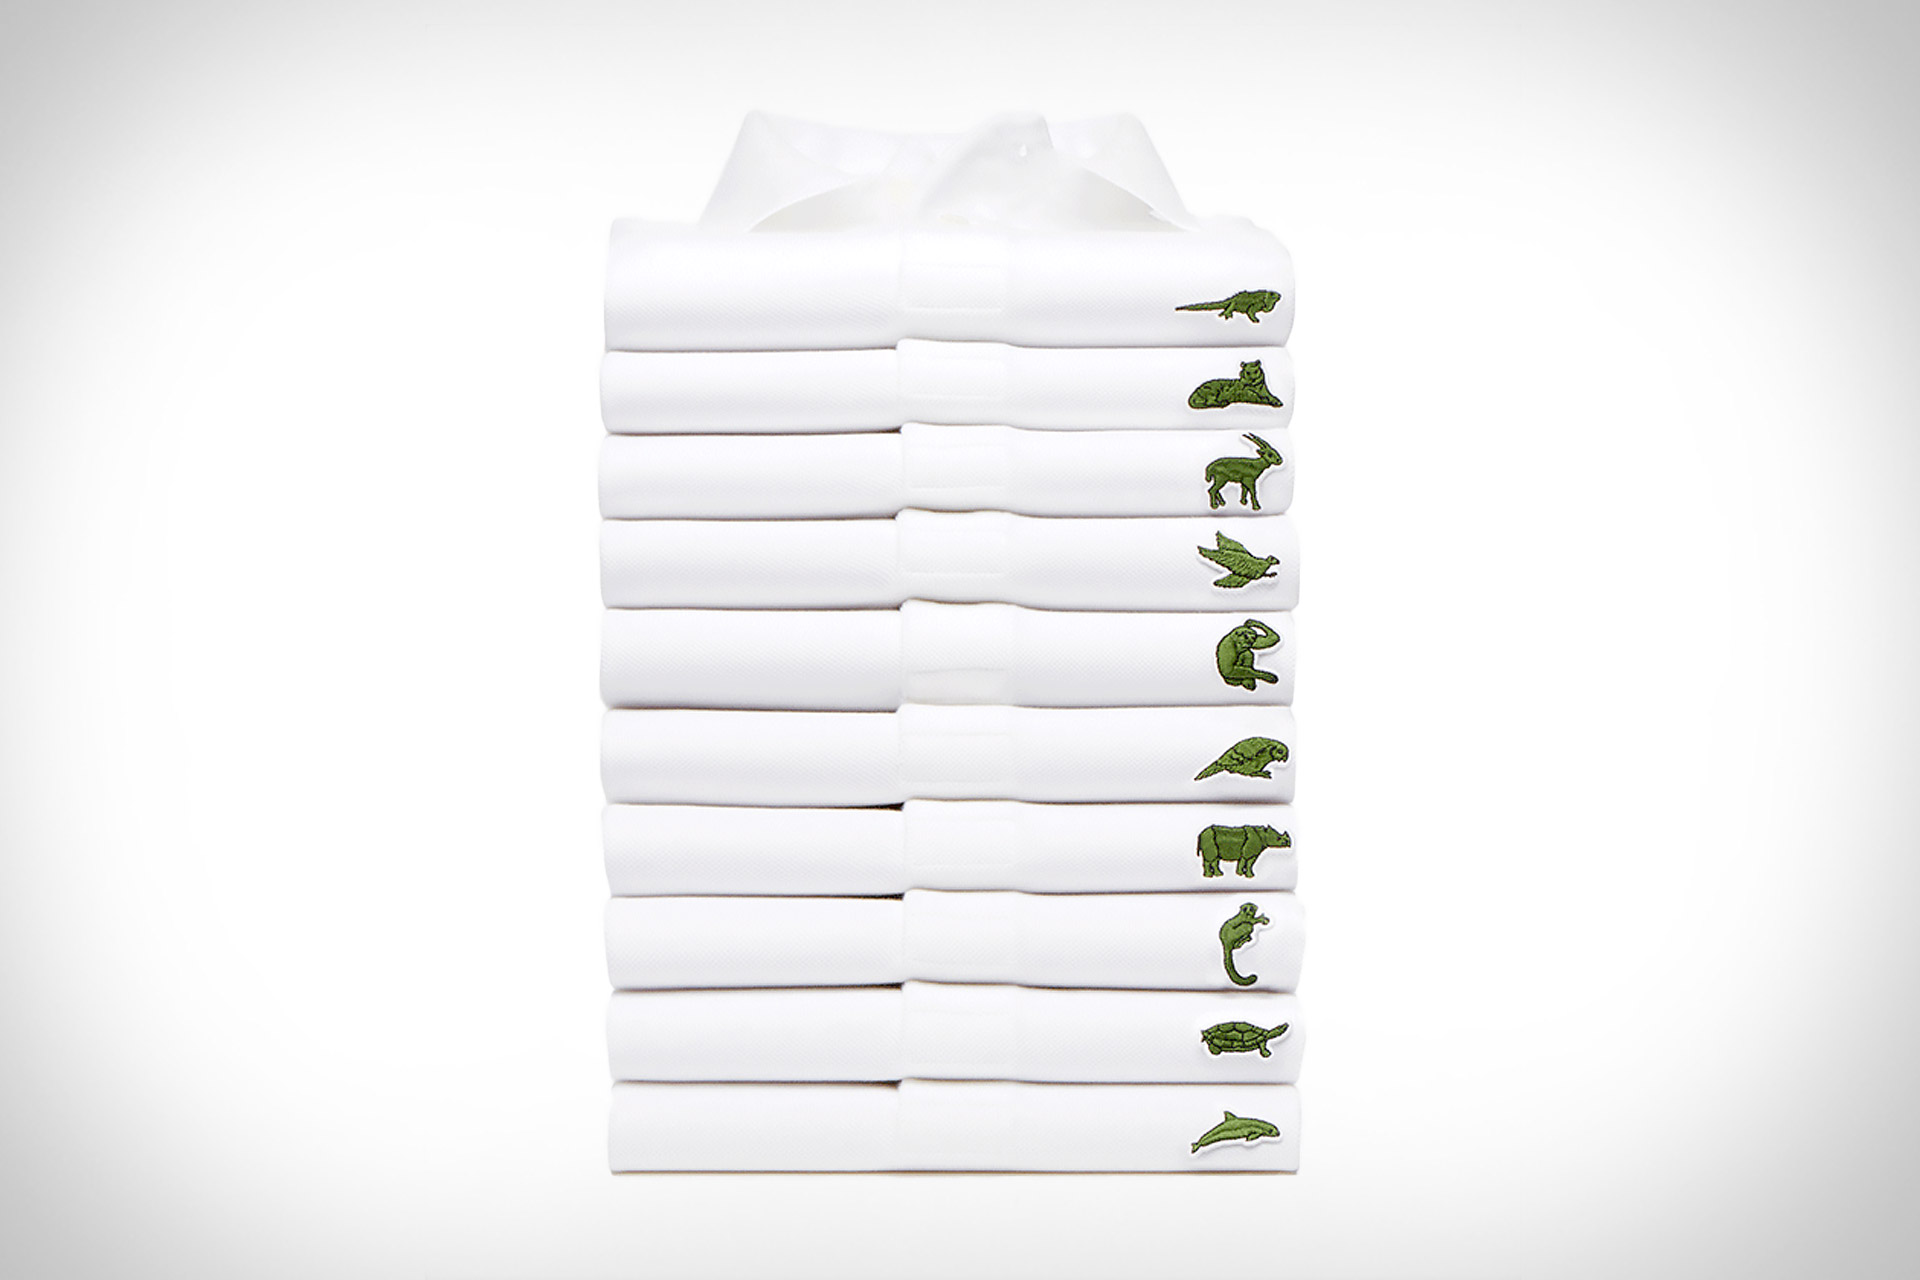 lacoste endangered species polo for sale